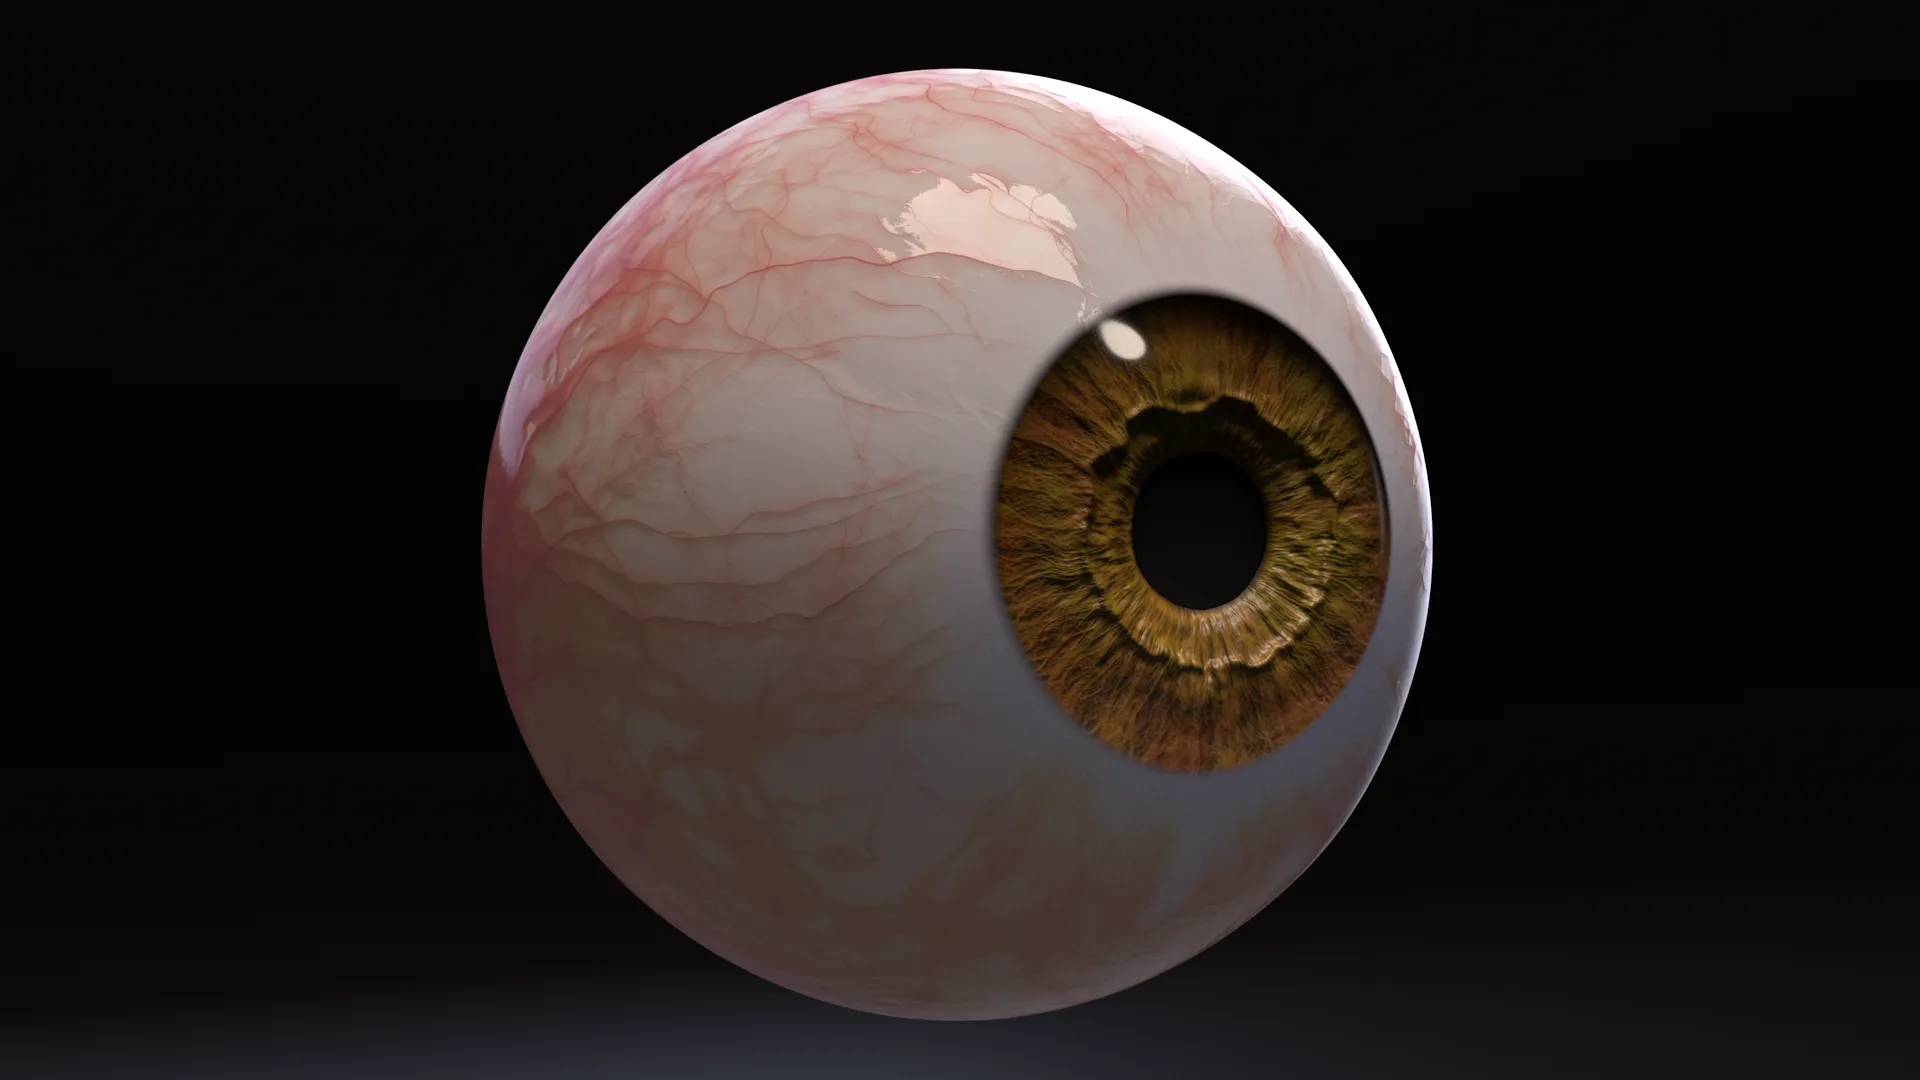 Photorealistic Eye with Pupil Dilation and Constriction 2.0